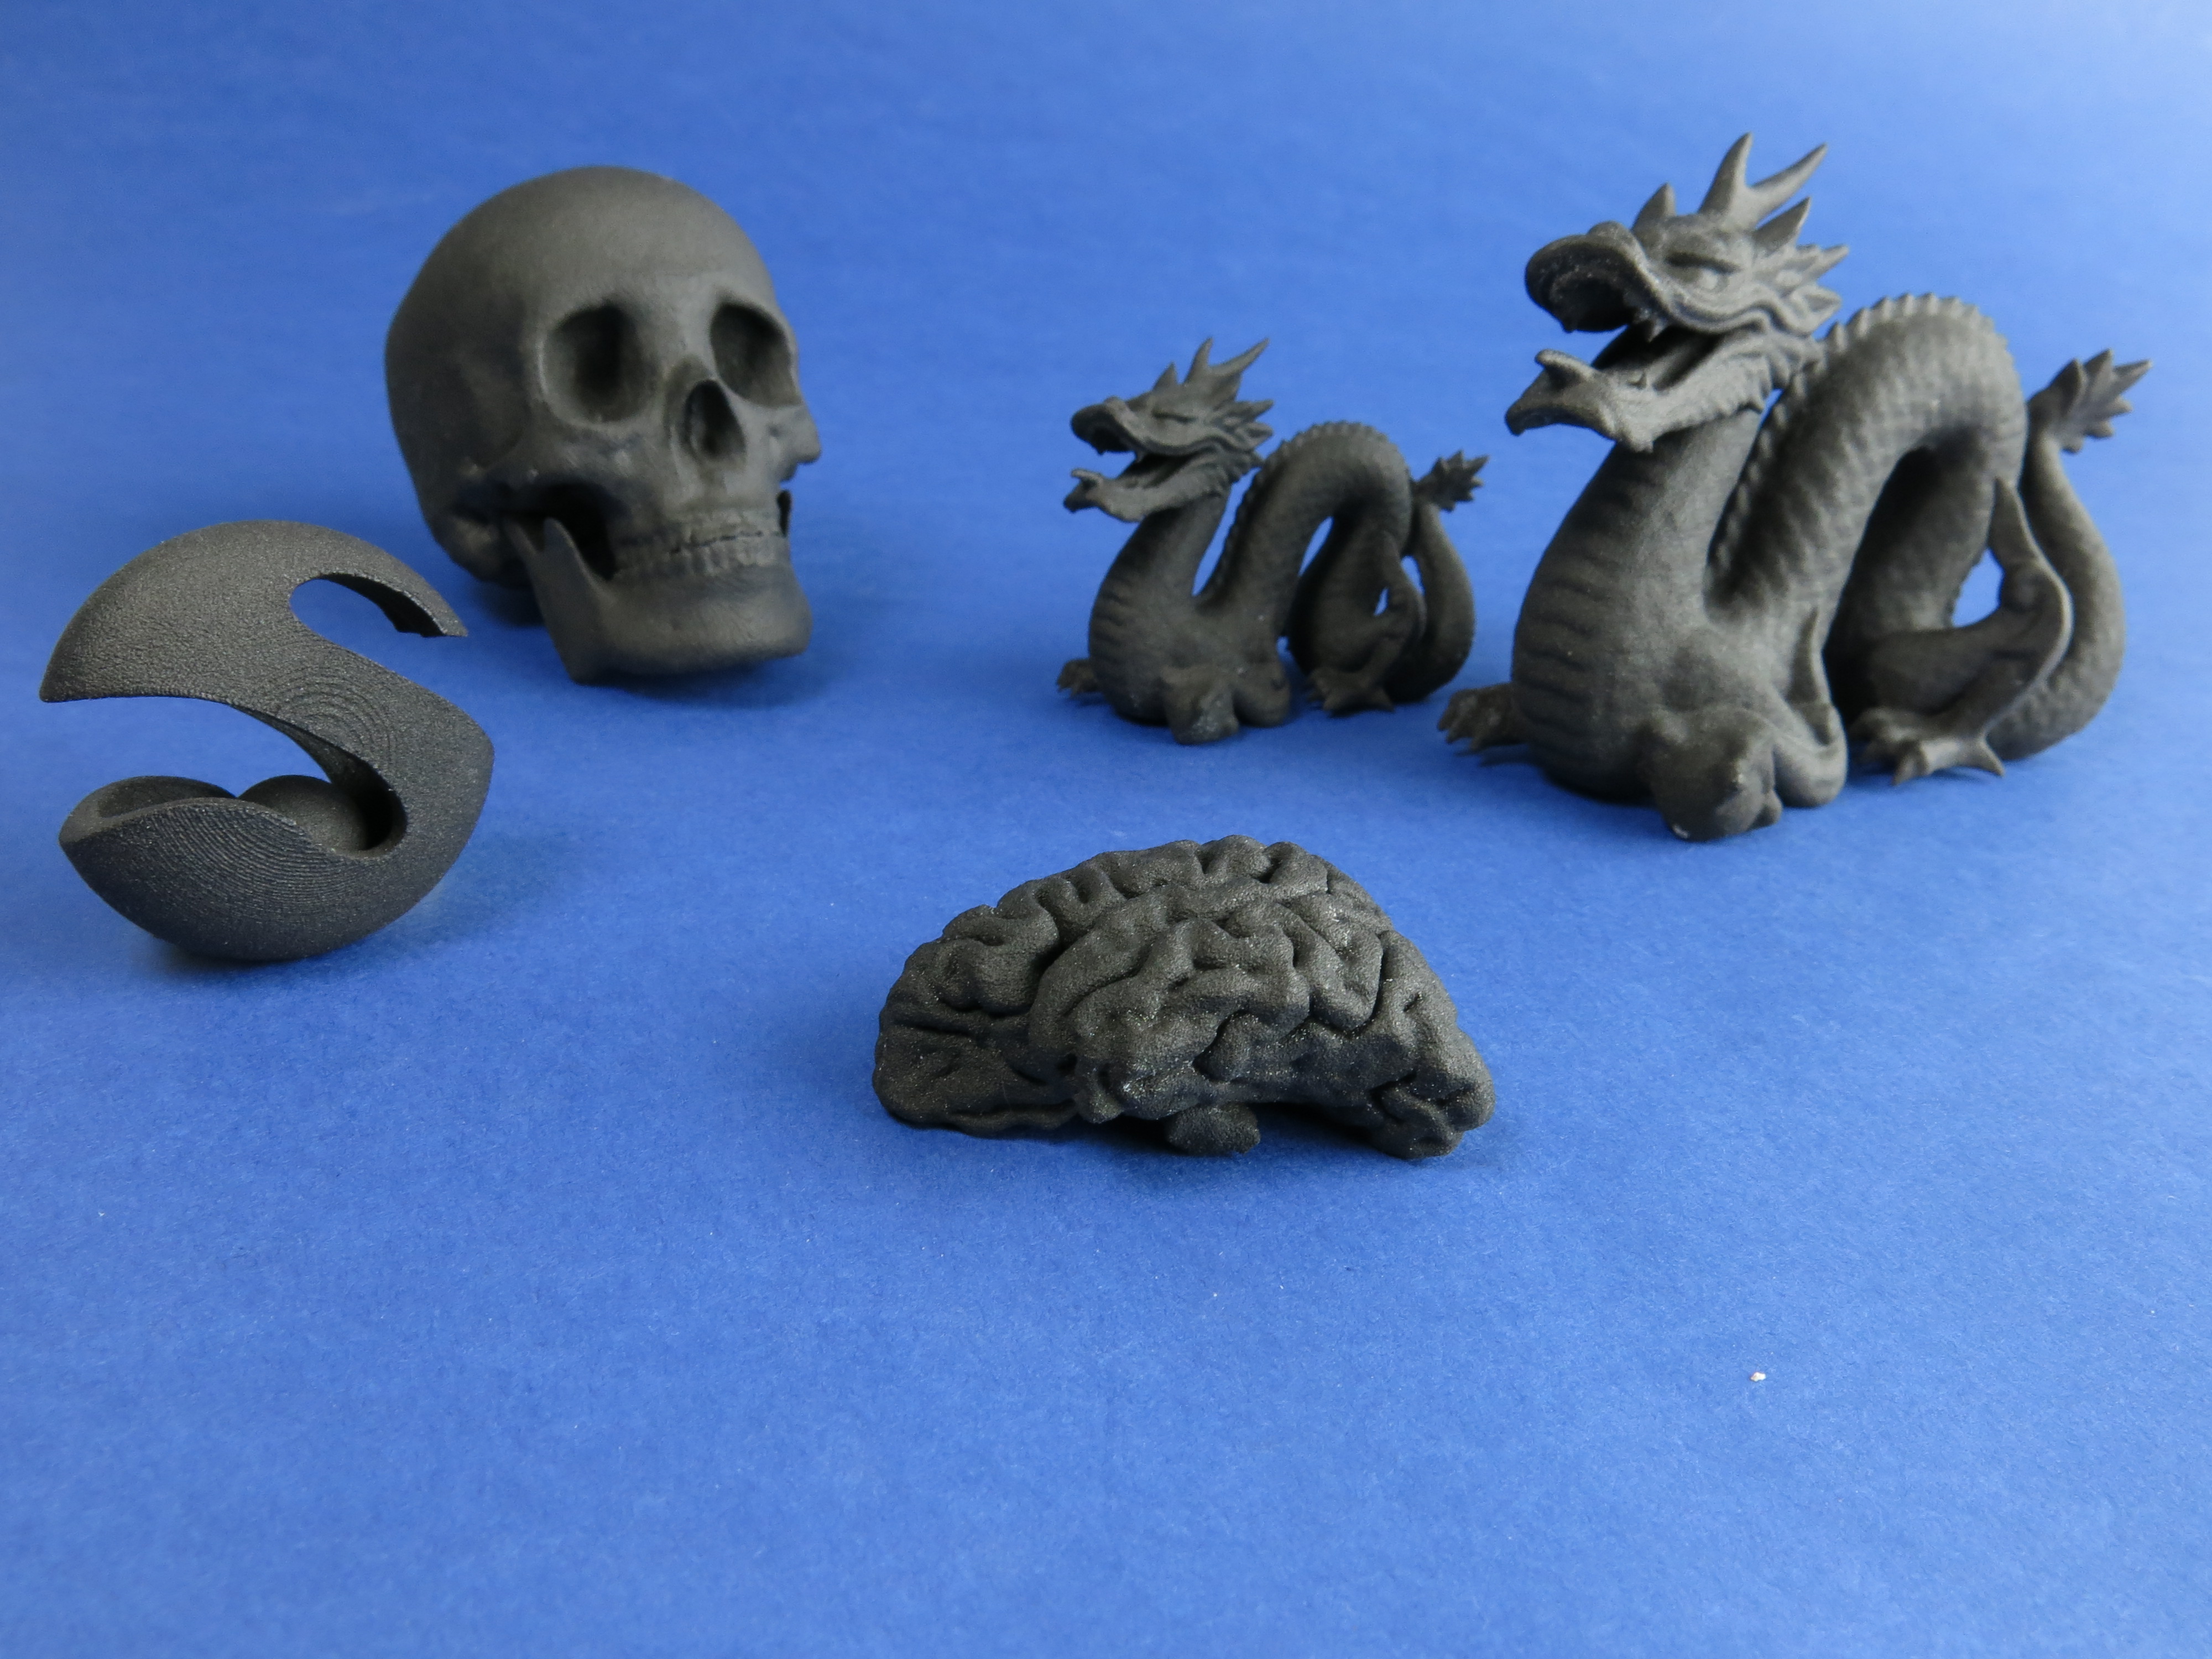 Discover our new Solid Black Plastic 3D printing material